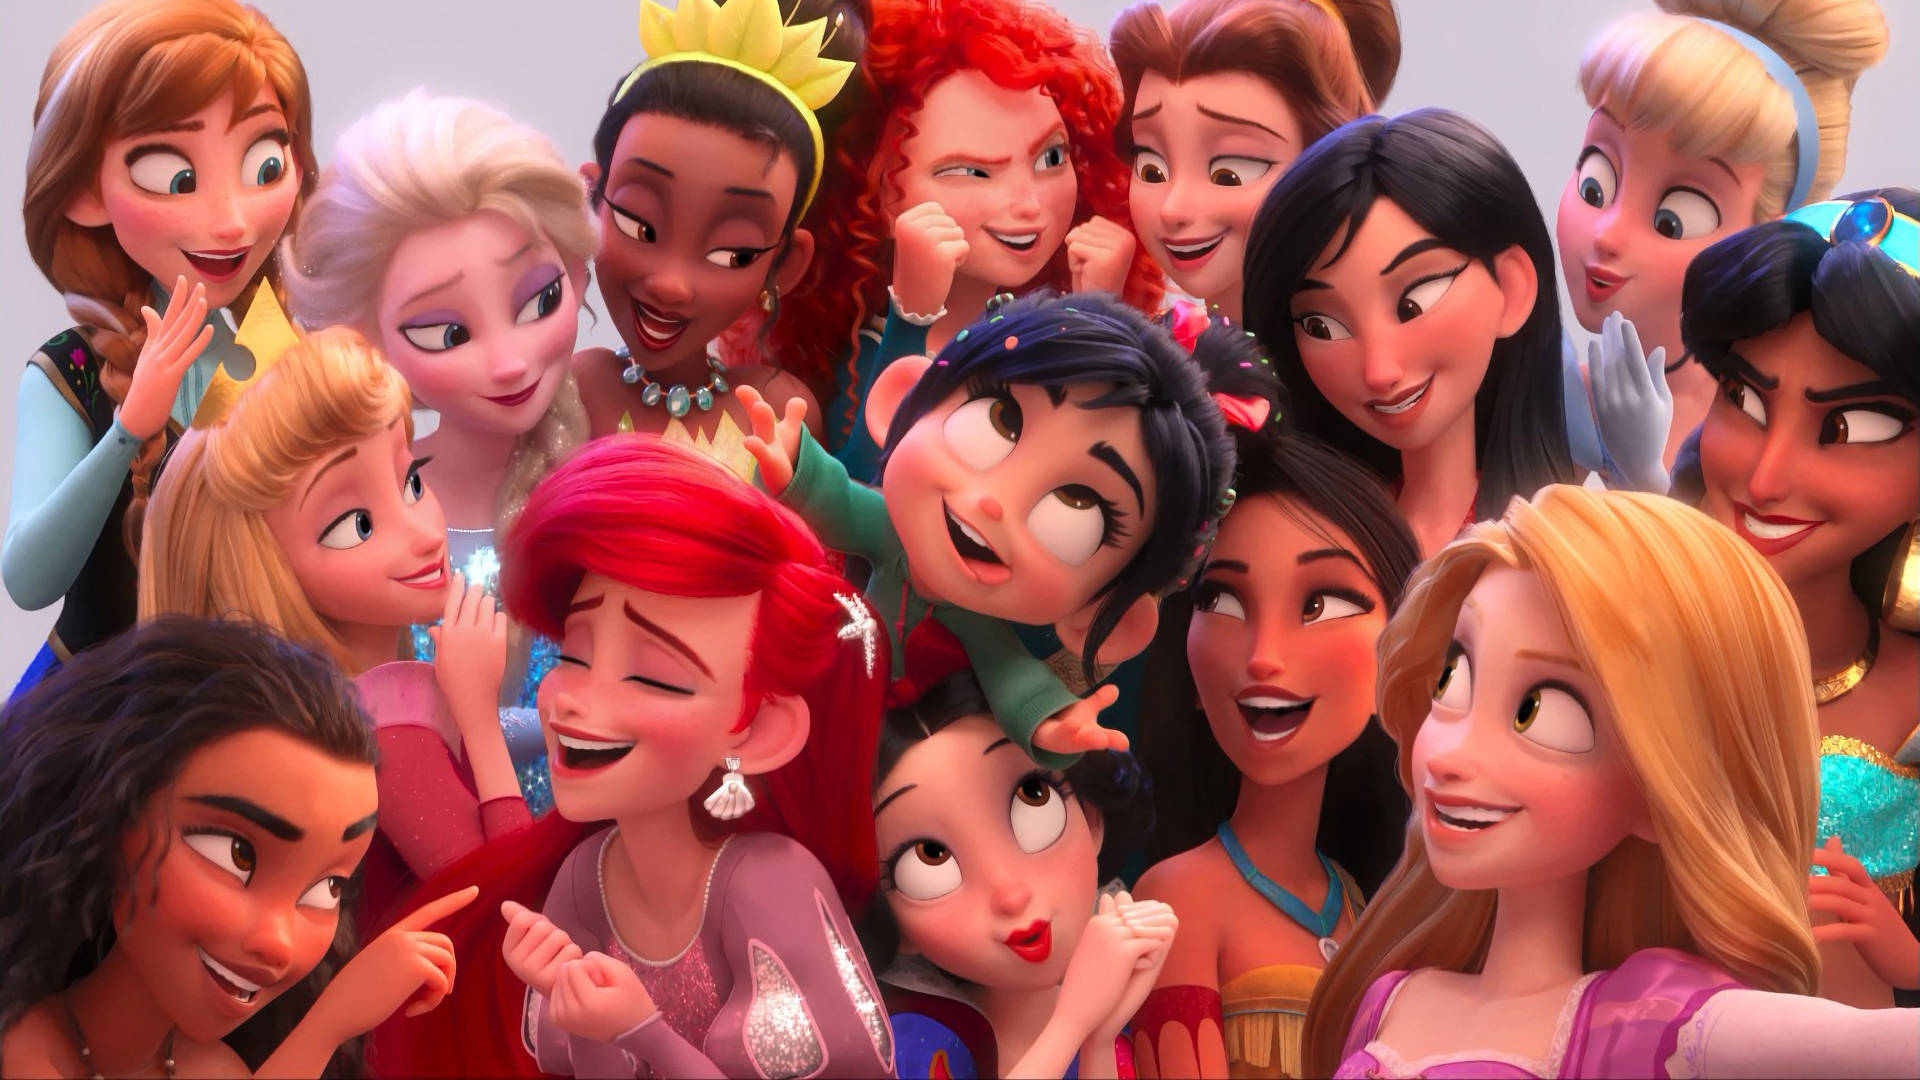 Feel the Magic with this Cute Aesthetic Disney Princess Wallpaper